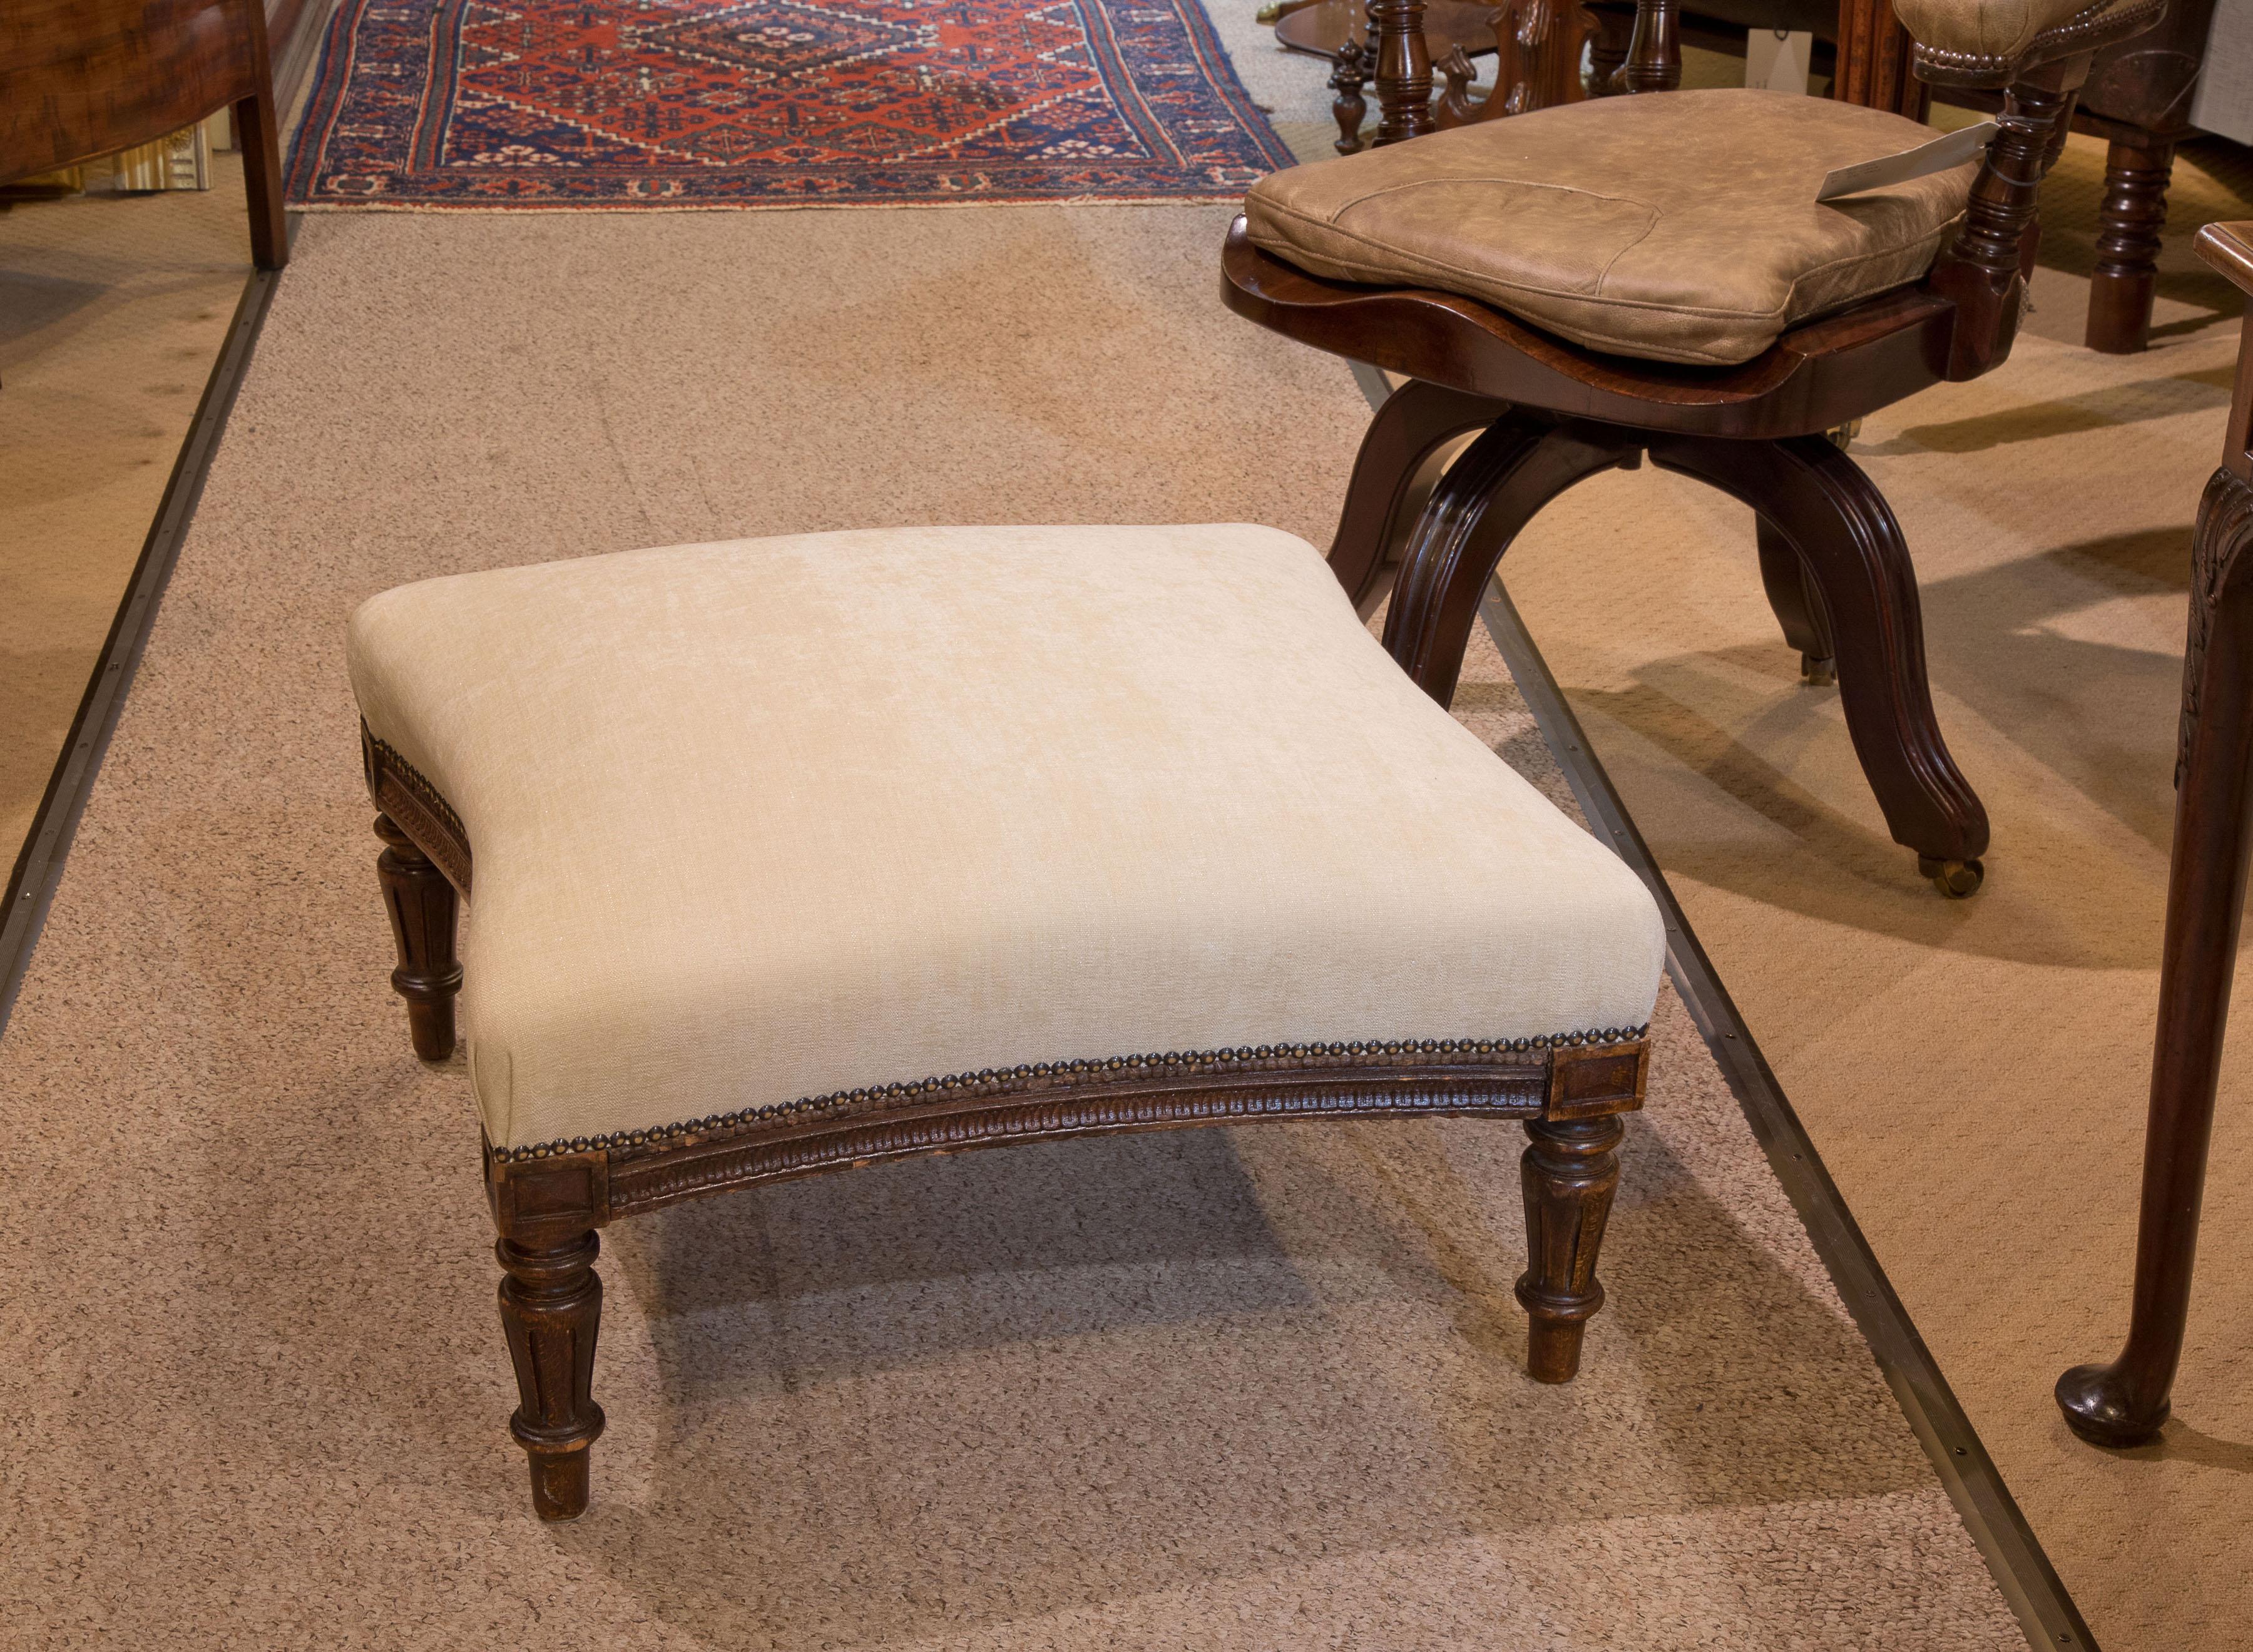 Intricately Carved Late 19th Century Large French Footstool (19. Jahrhundert) im Angebot